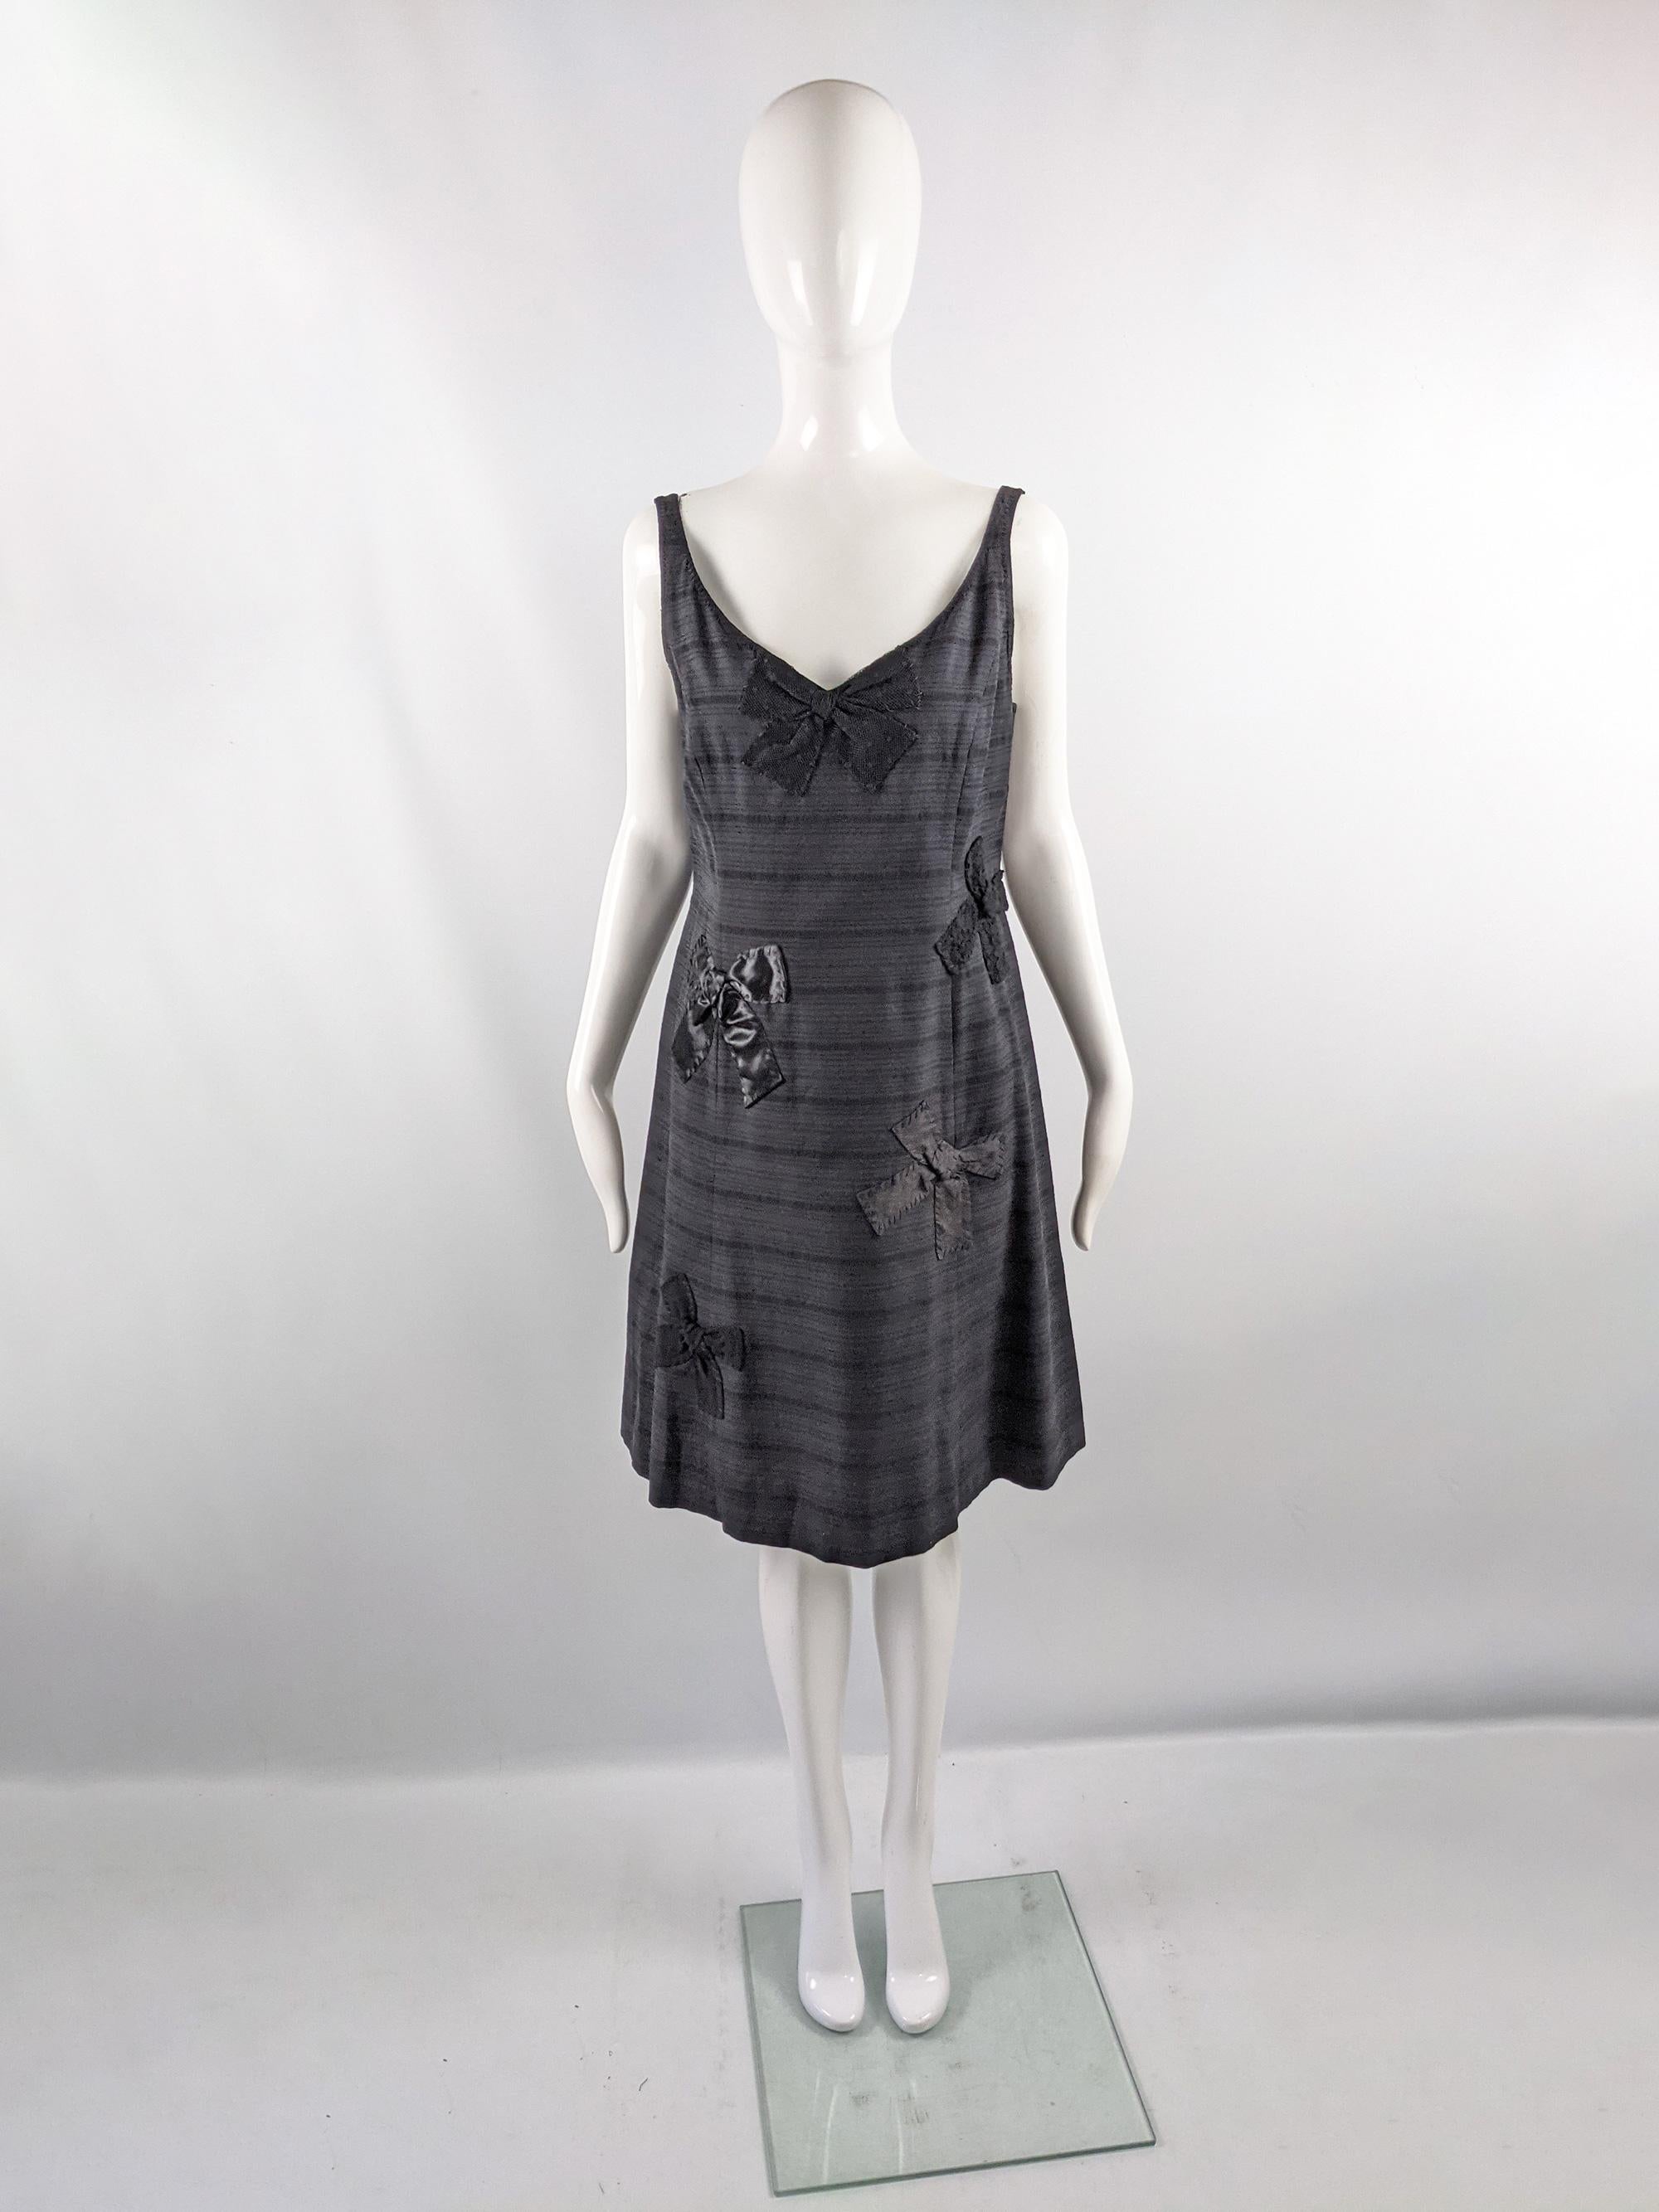 A fabulous vintage sleeveless Moschino dress from the late 90s / early 2000s. In a black cotton-rayon blend fabric with sweet bow appliques. Perfect for a cocktail party or dressed up for an evening event. 

Size: Marked vintage IT 46 and measures